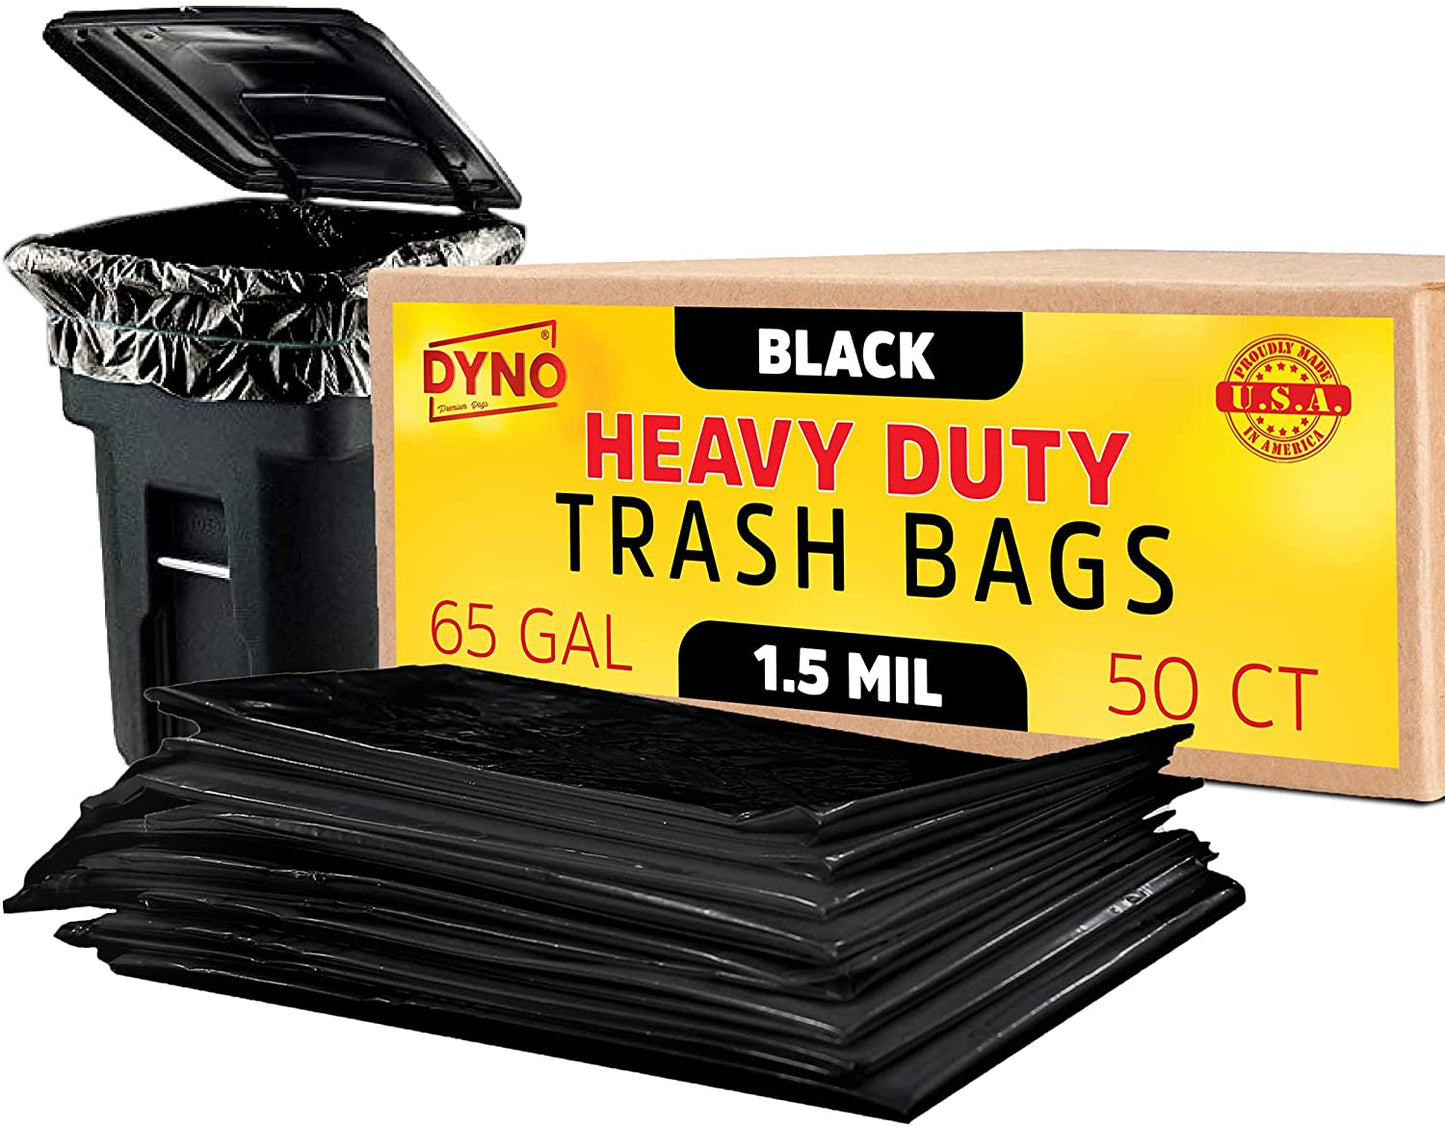 Super Large Trash Bags - 100 Gallons  Large Trash Can Liners – PlasticMill